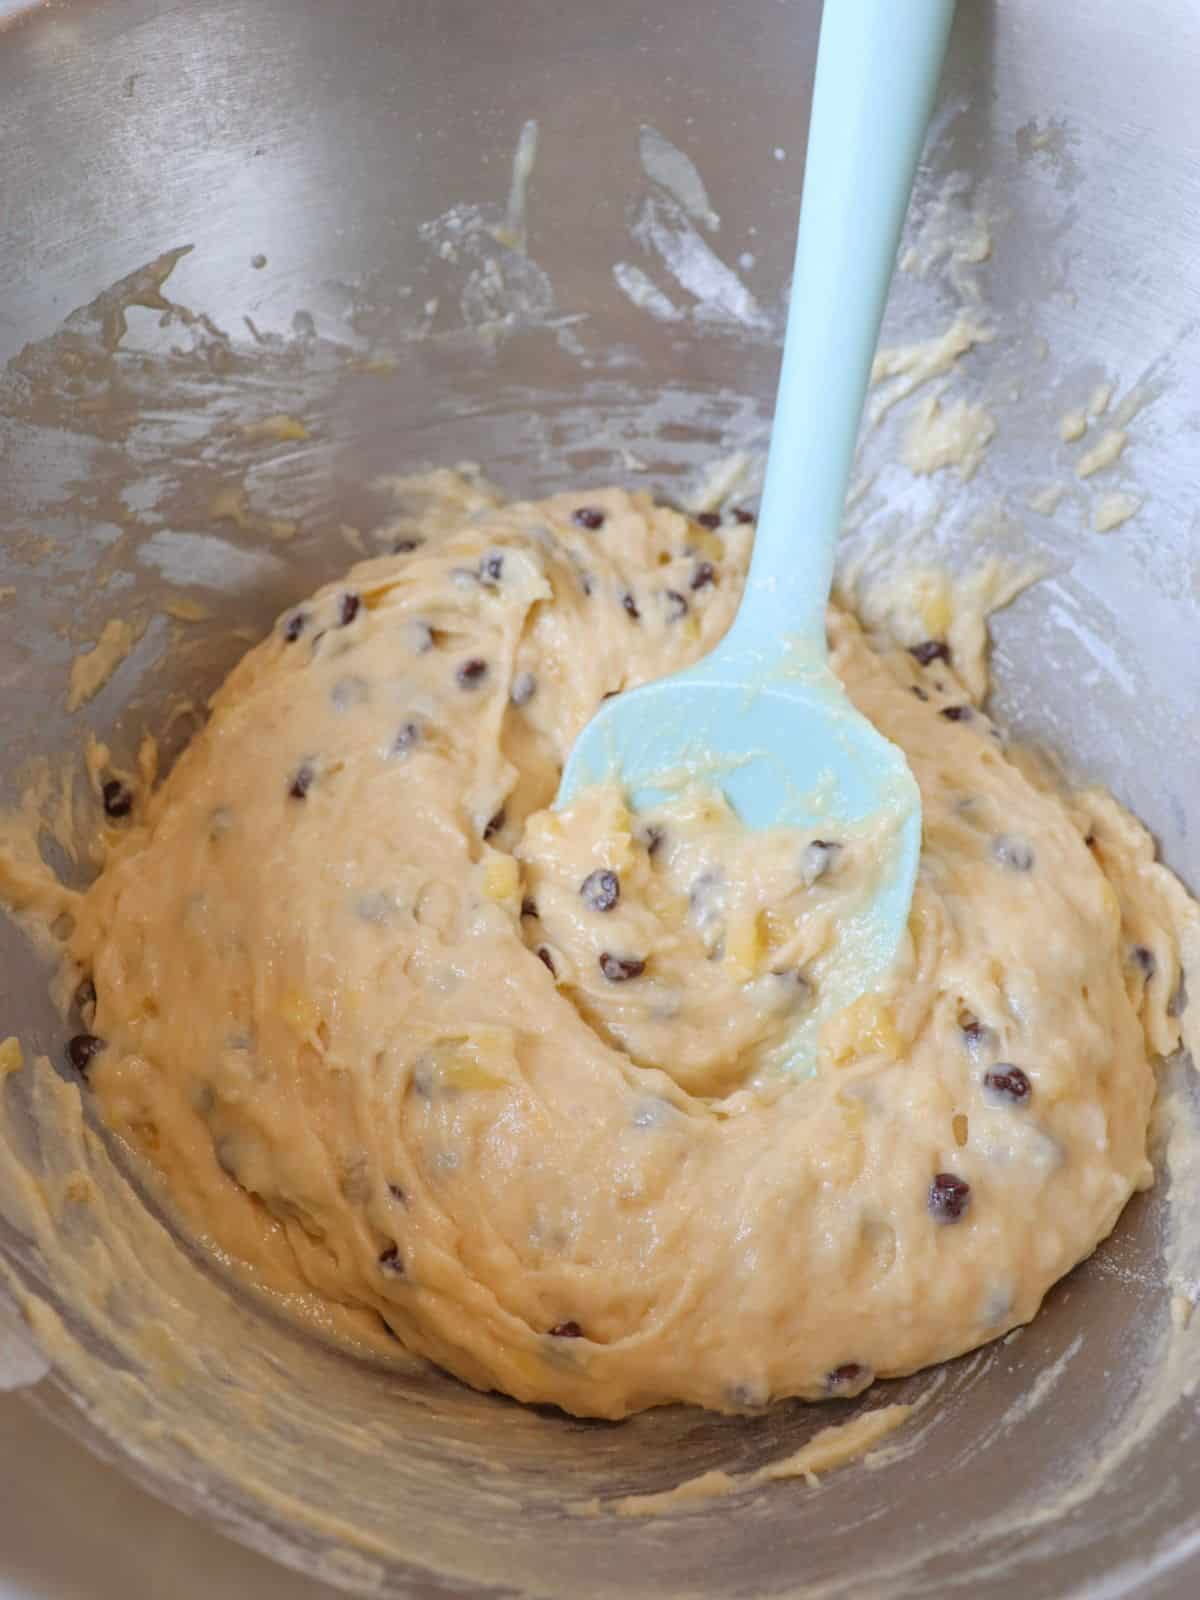 Vegan chocolate chip banana bread batter in a mixing bowl with a blue rubber spatula.